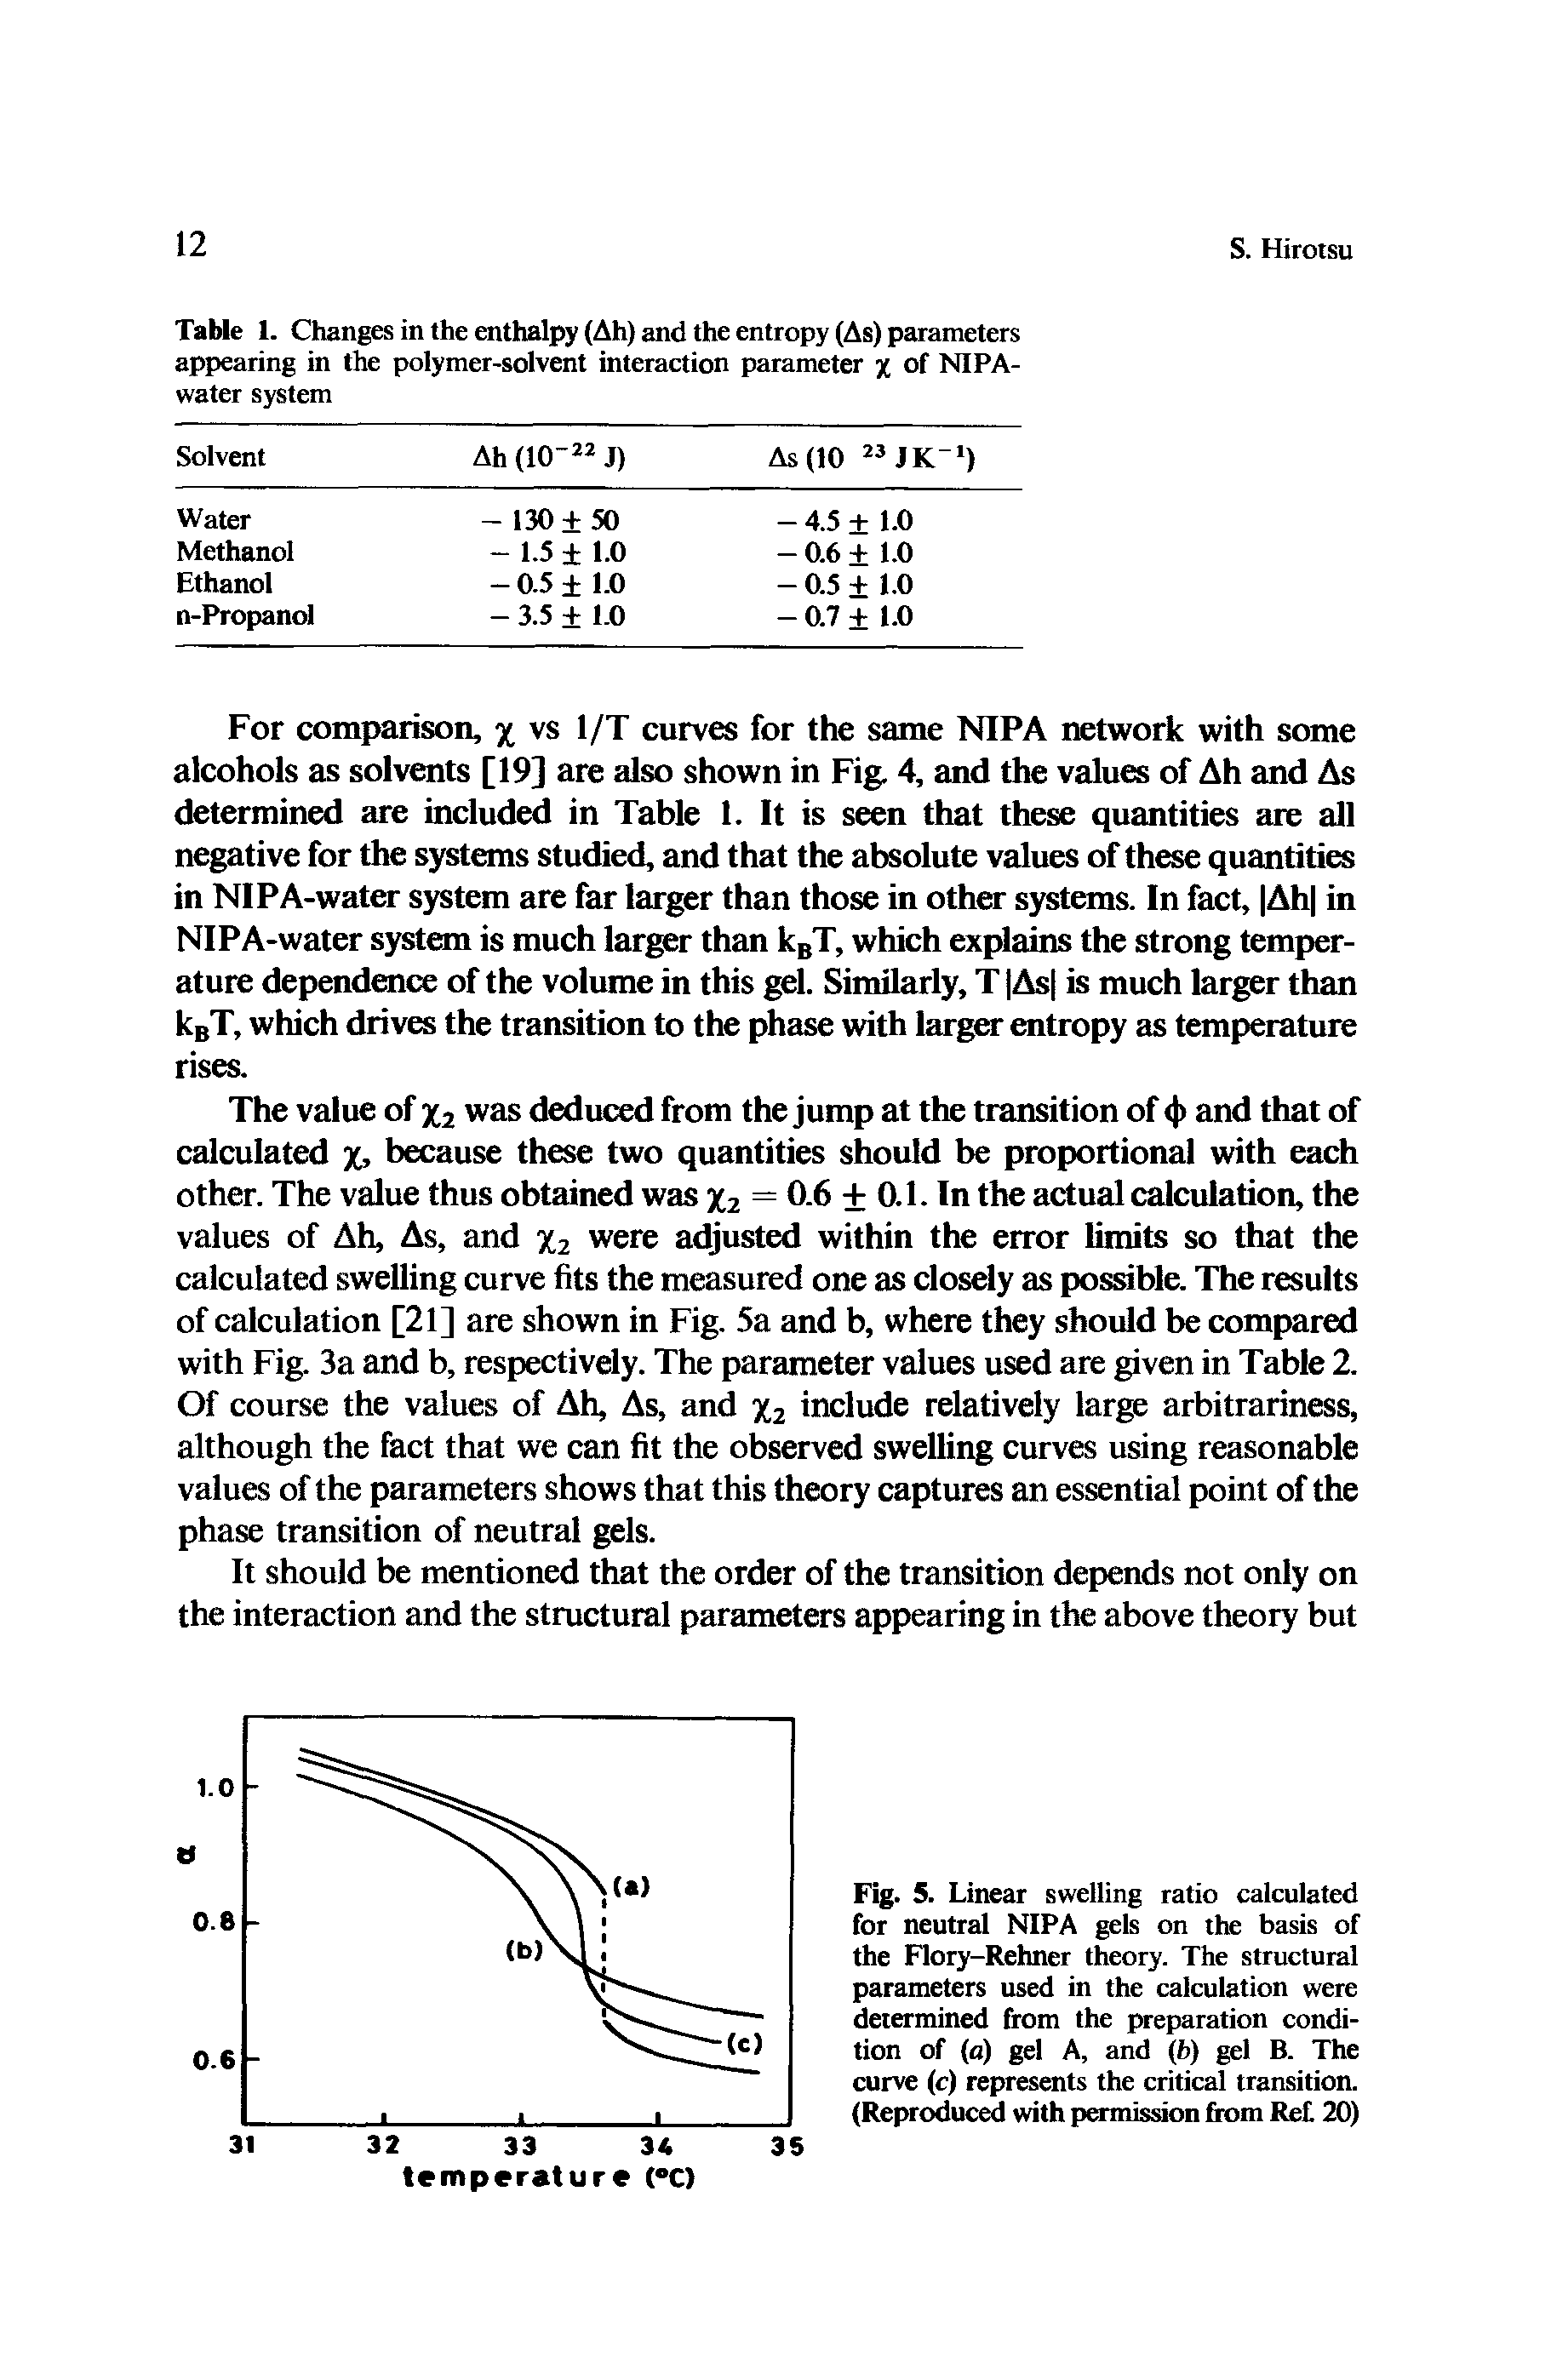 Table 1. Changes in the enthalpy (Ah) and the entropy (As) parameters appearing in the polymer-solvent interaction parameter % of NIPA-water system...